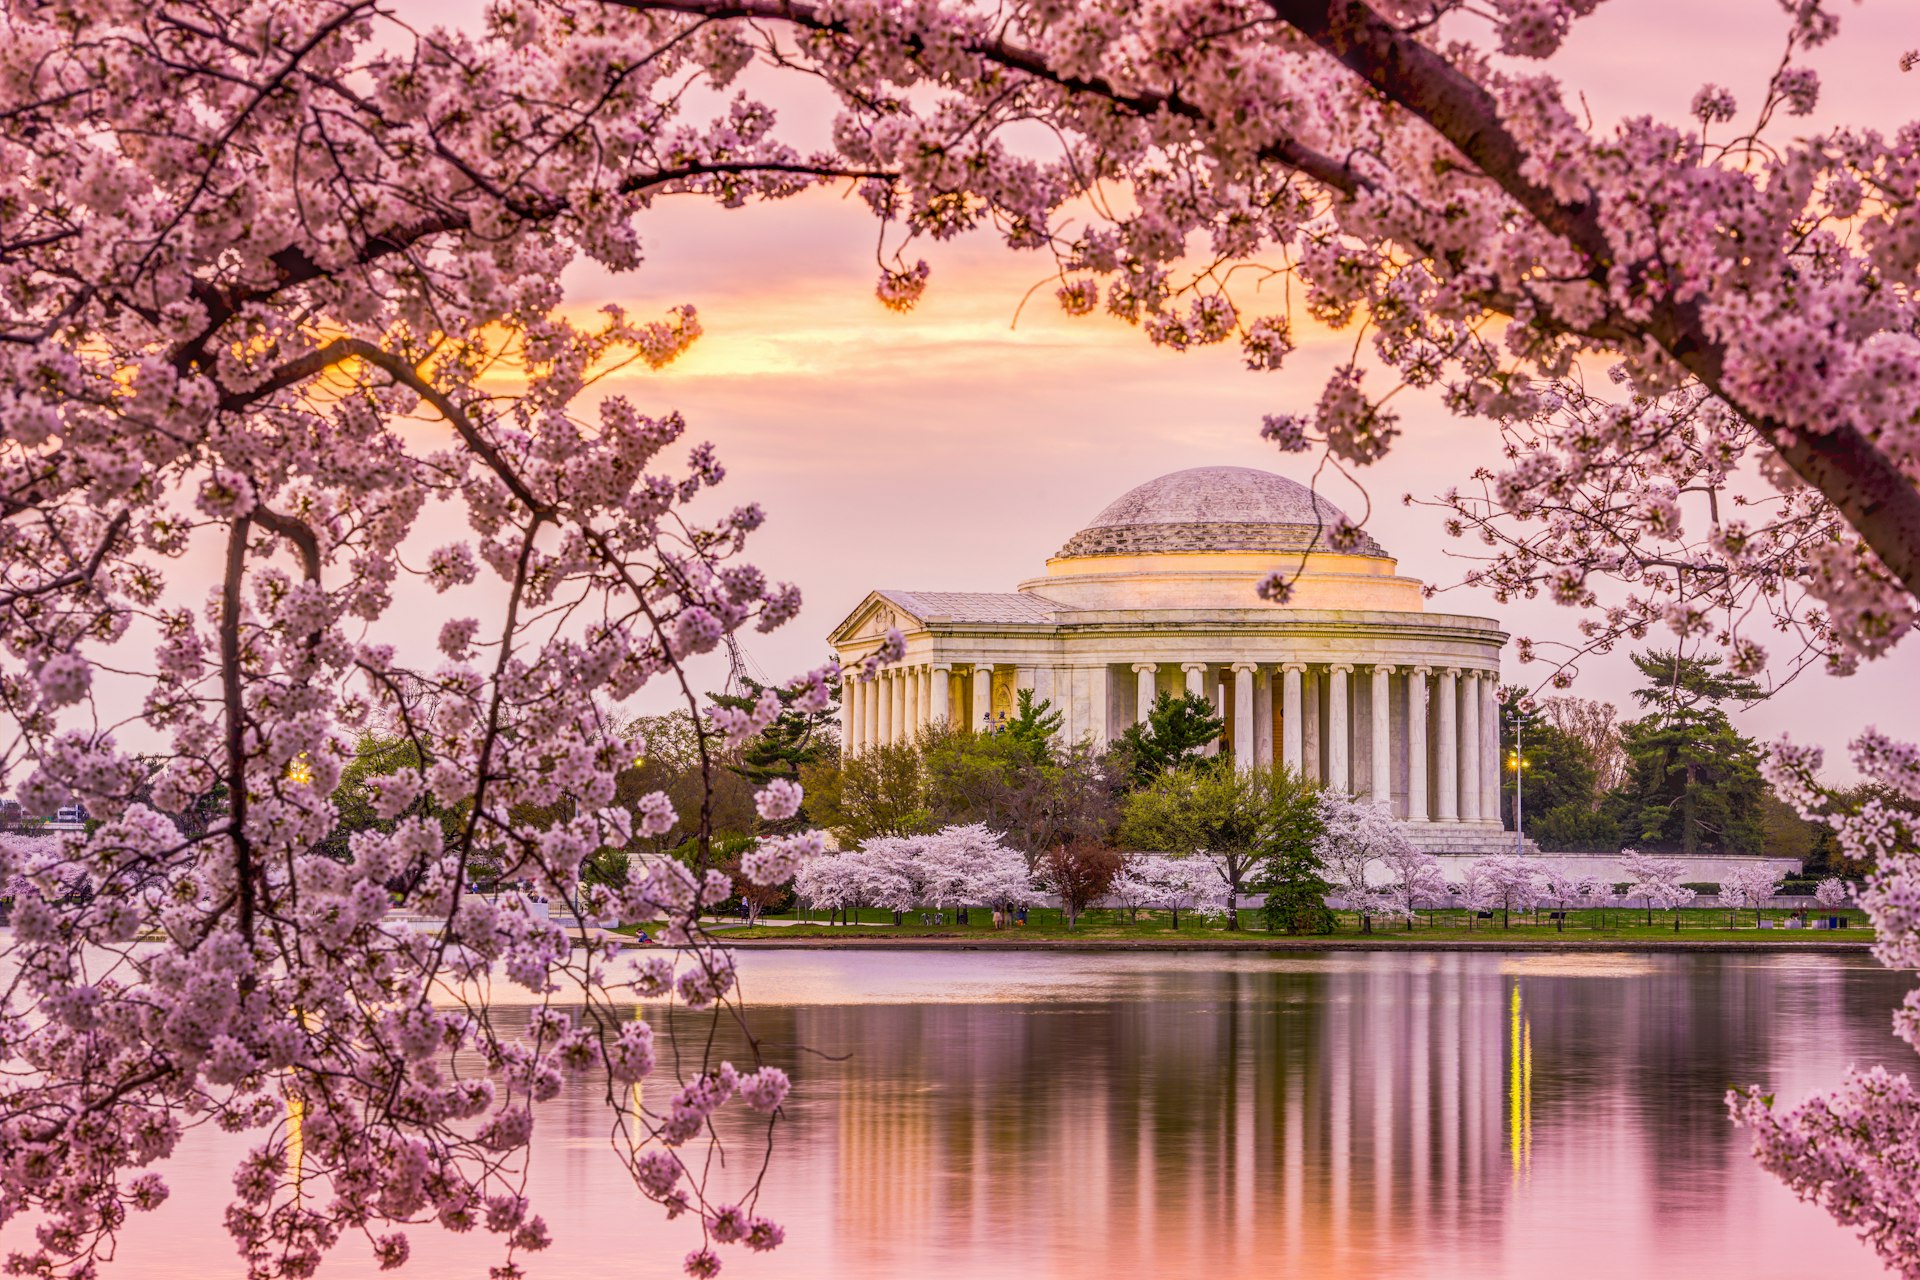 Jefferson Memorial surrounded by cherry blossoms in Washington, DC